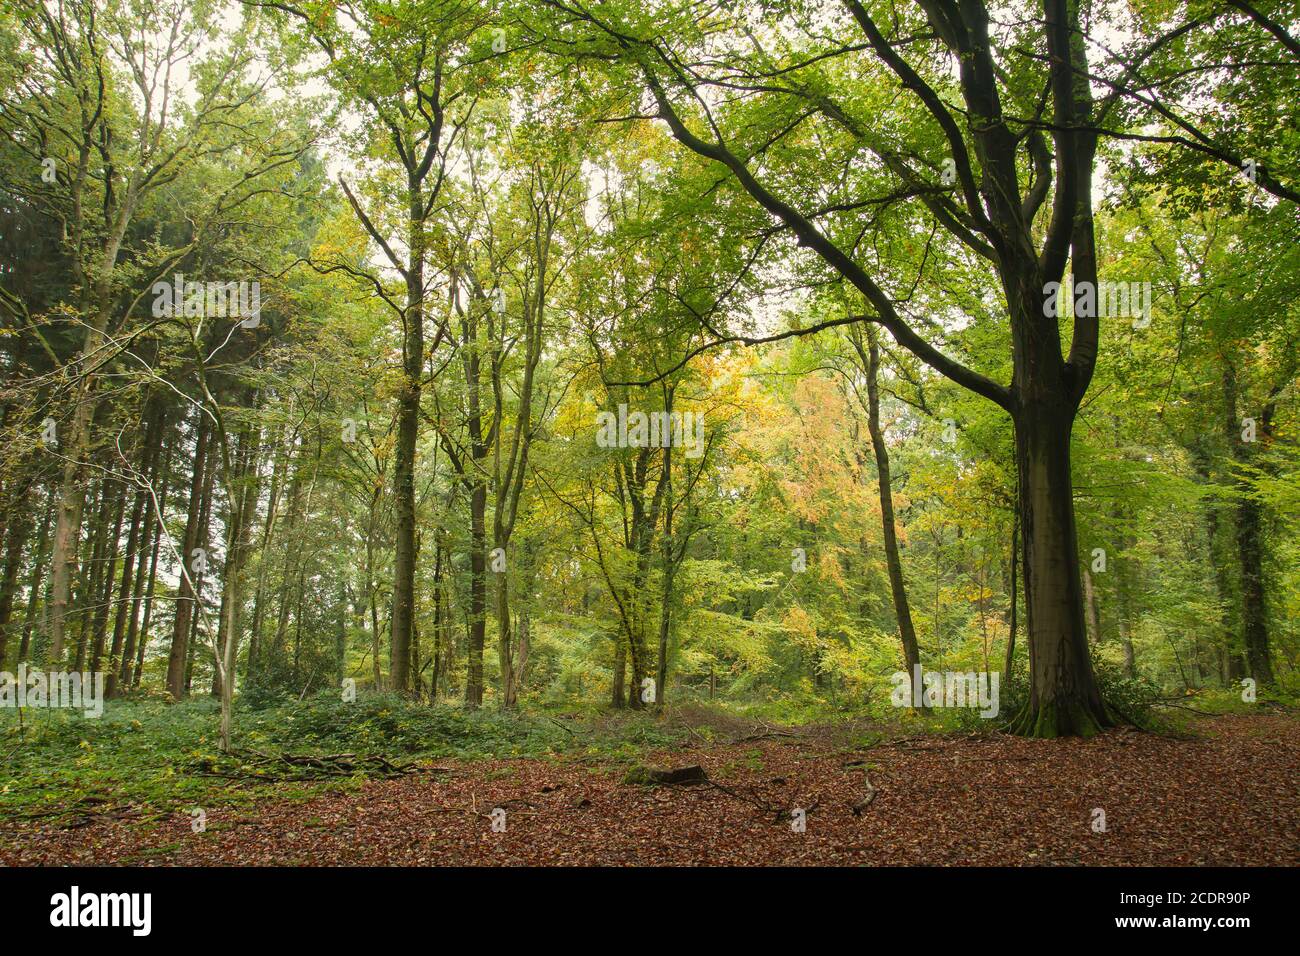 Green forest landscape Stock Photo